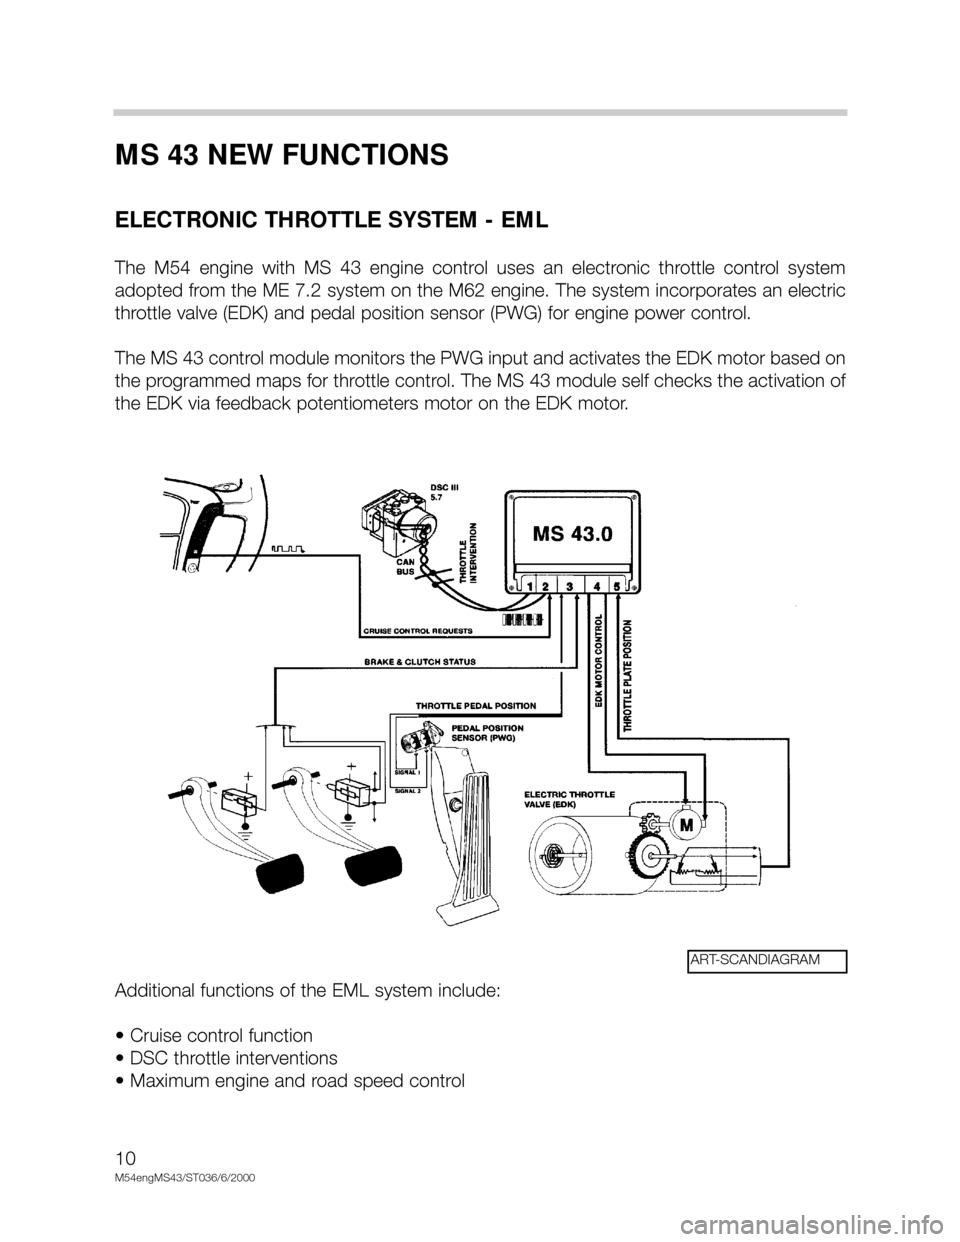 BMW X5 2001 E53 M54 Engine Workshop Manual 10
M54engMS43/ST036/6/2000
MS 43 NEW FUNCTIONS
ELECTRONIC THROTTLE SYSTEM - EML
The  M54  engine  with  MS  43  engine  control  uses  an  electronic  throttle  control  system
adopted from the ME 7.2